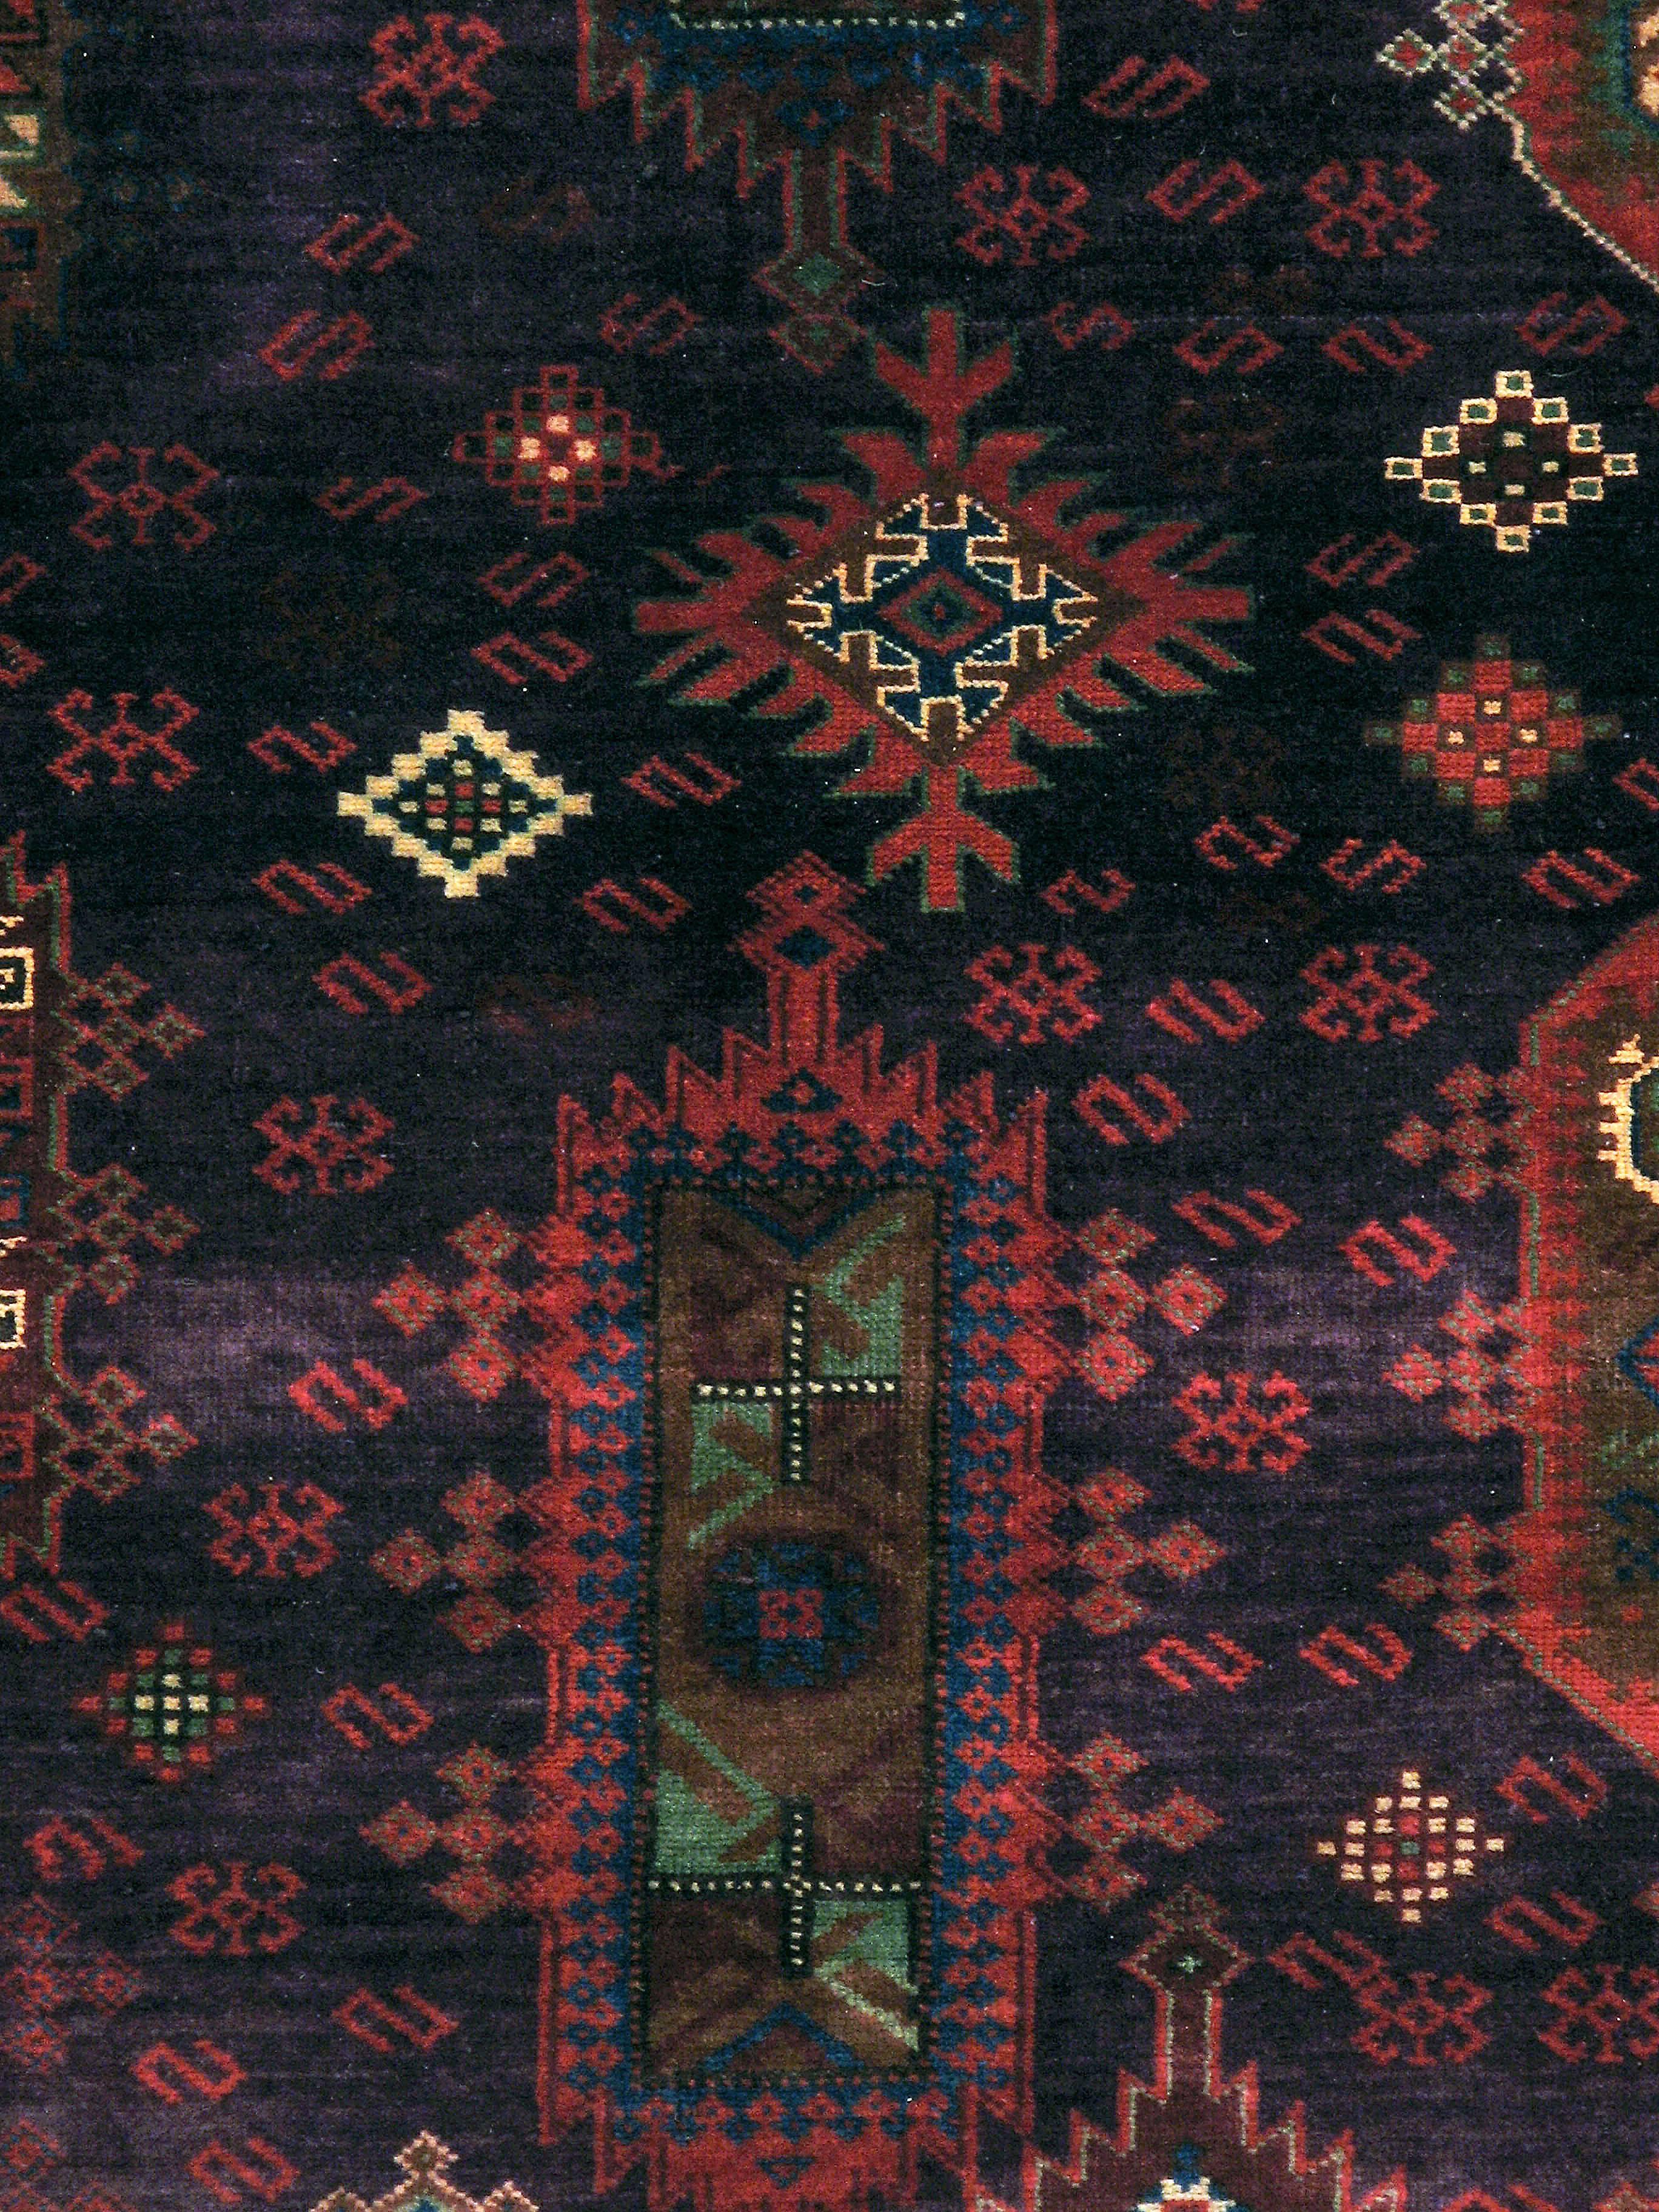 An antique Indian Agra carpet from the second quarter of the 20th century.